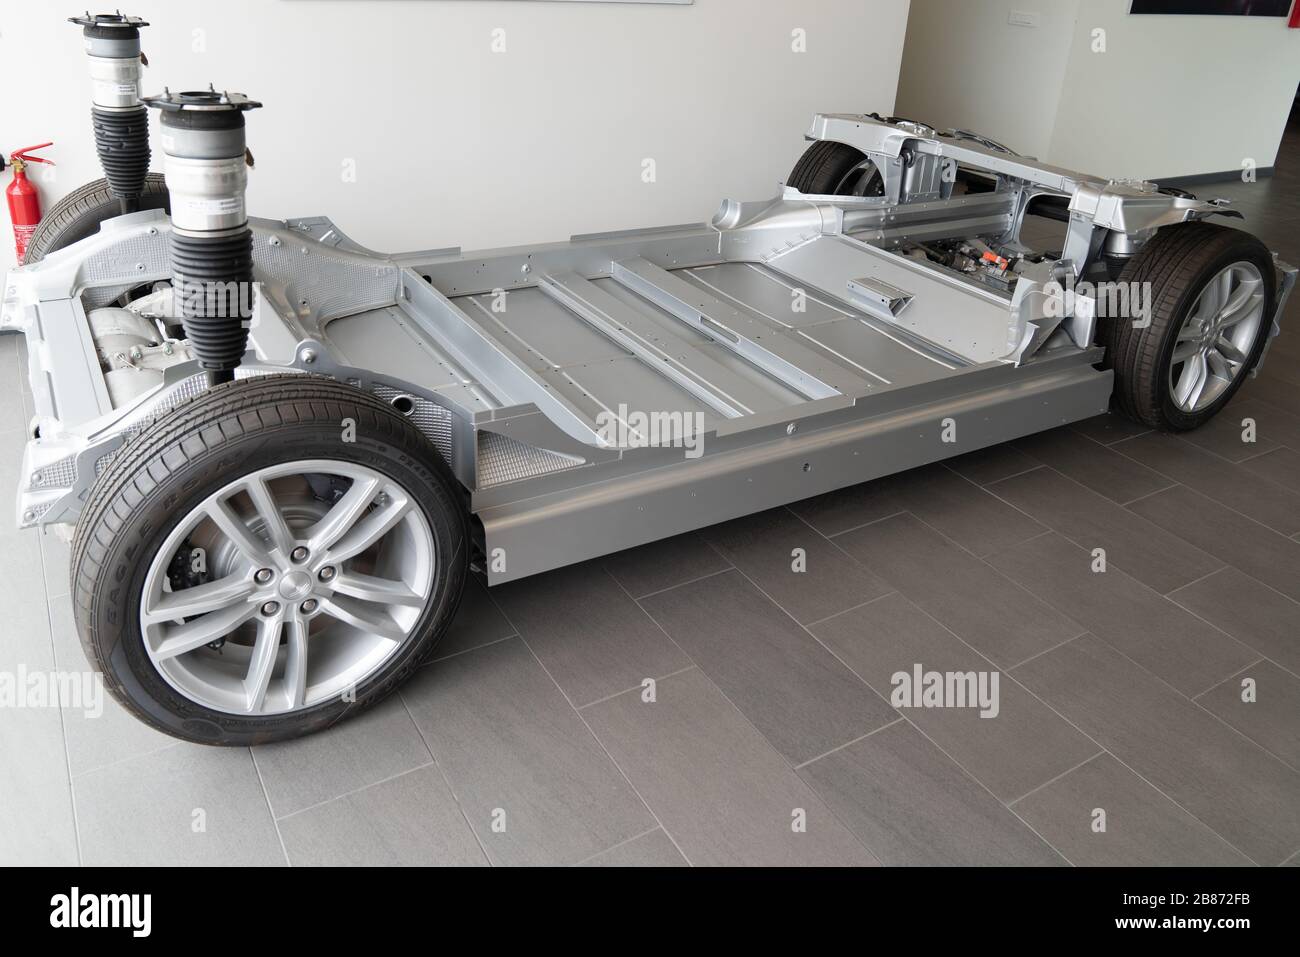 Bordeaux , Aquitaine / France - 11 07 2019 : tesla vehicle electric ve Car Chassis real in store showroom dealership Stock Photo